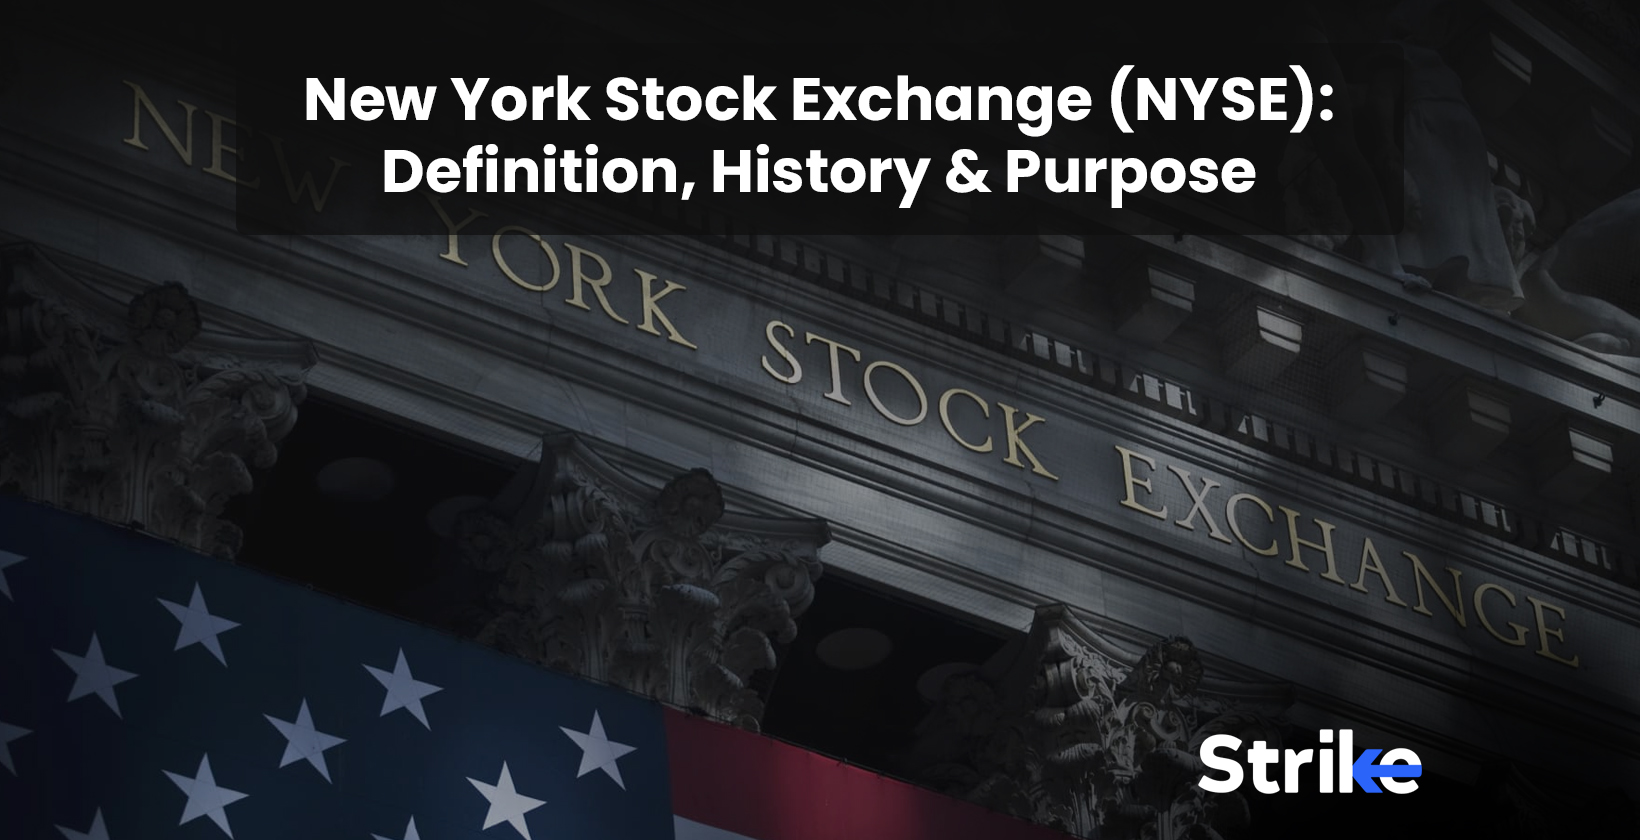 New York Stock Exchange (NYSE): Definition, History, and Purpose